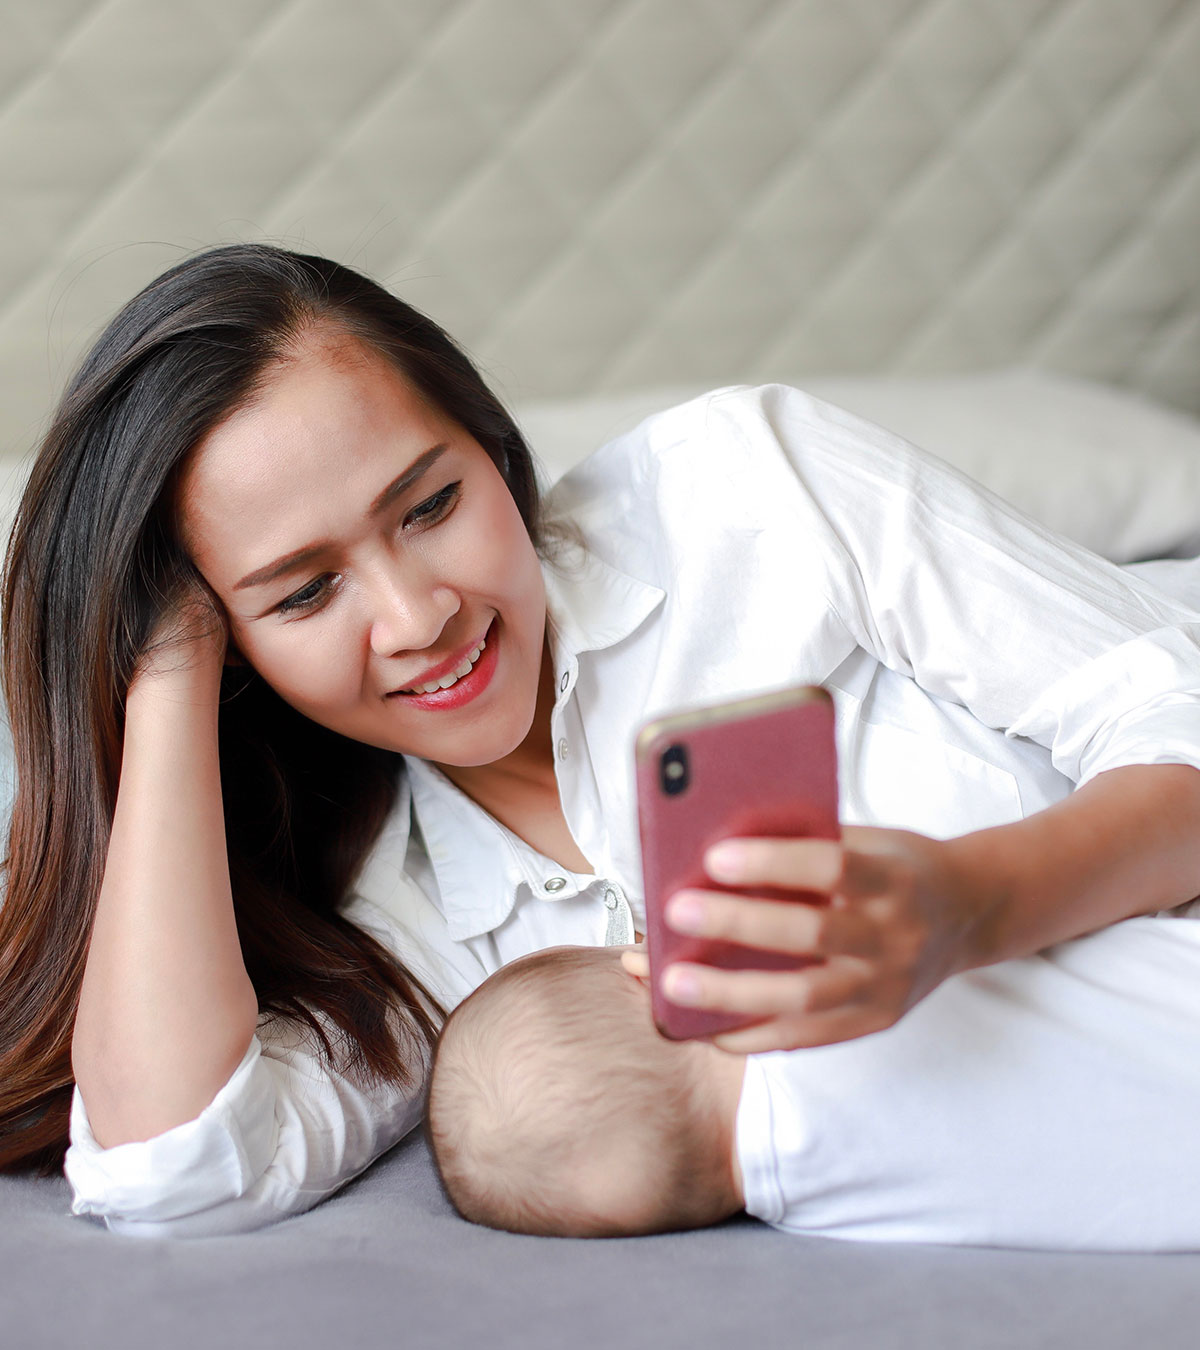 The Real Reasons Why Moms Like Me Share Their Breastfeeding Photos